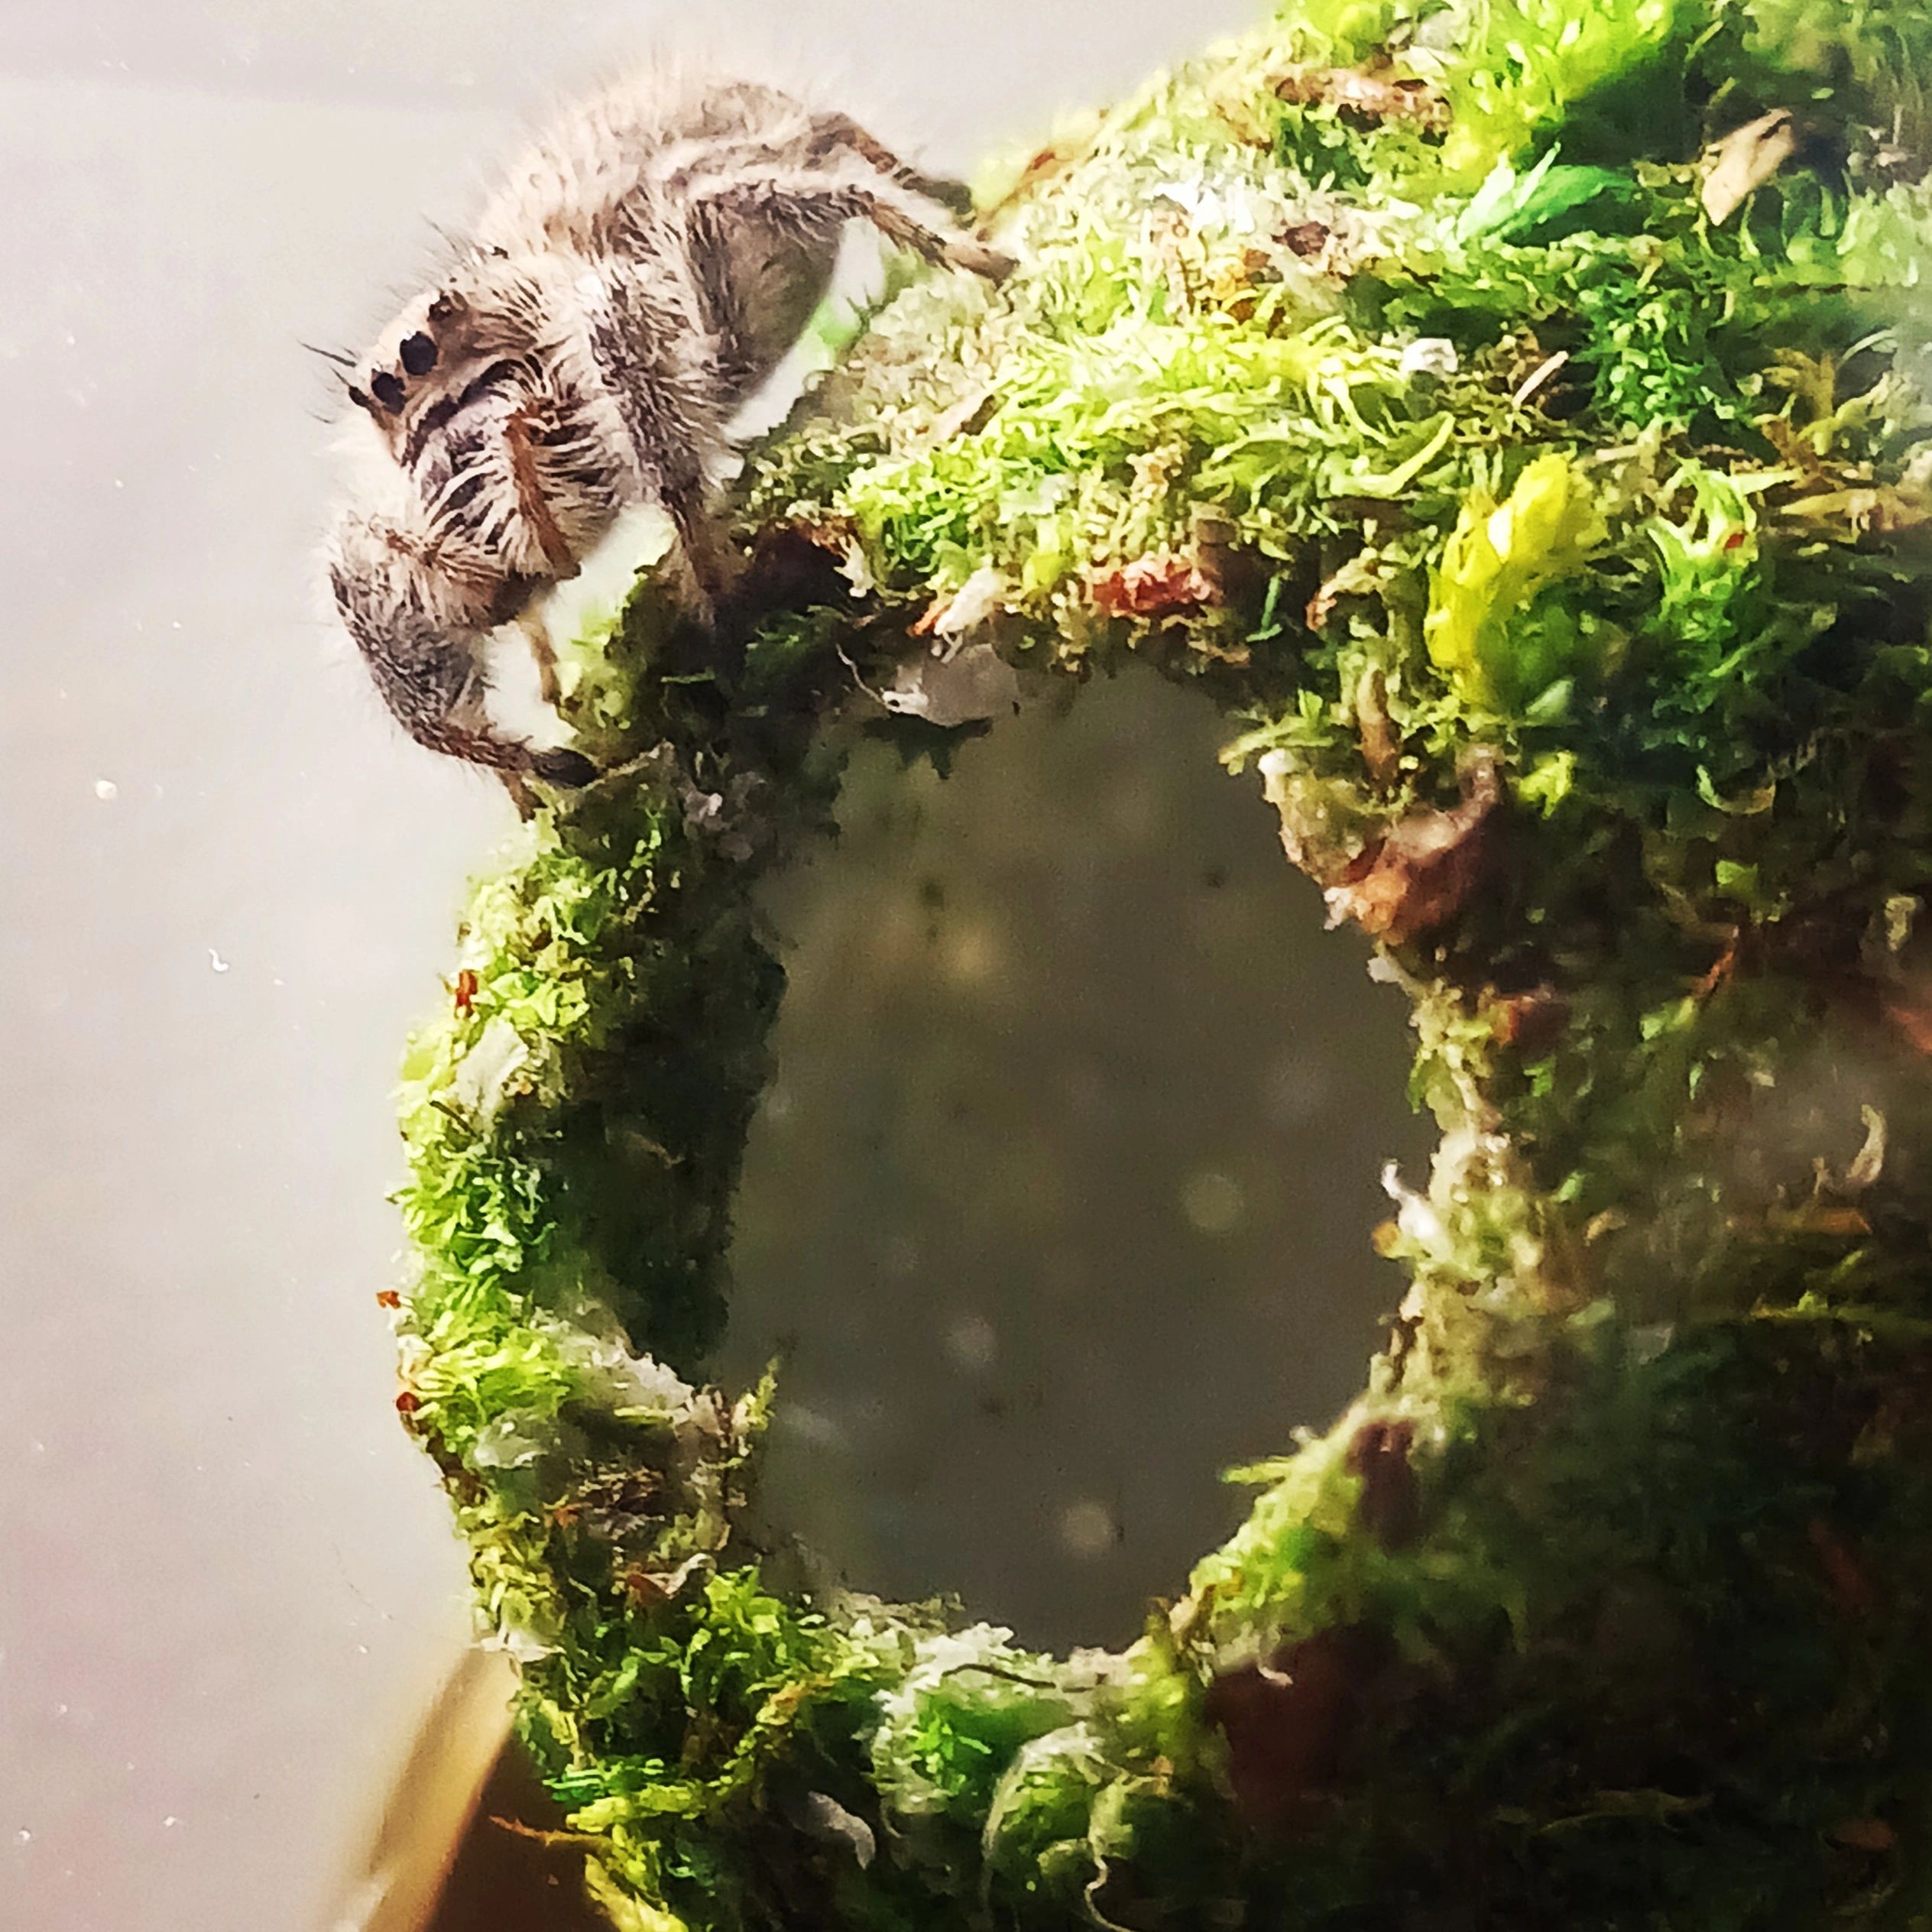 Spoodville Jumping Spider For Sale, Captive Bred Jumping Spiders For  Adoption